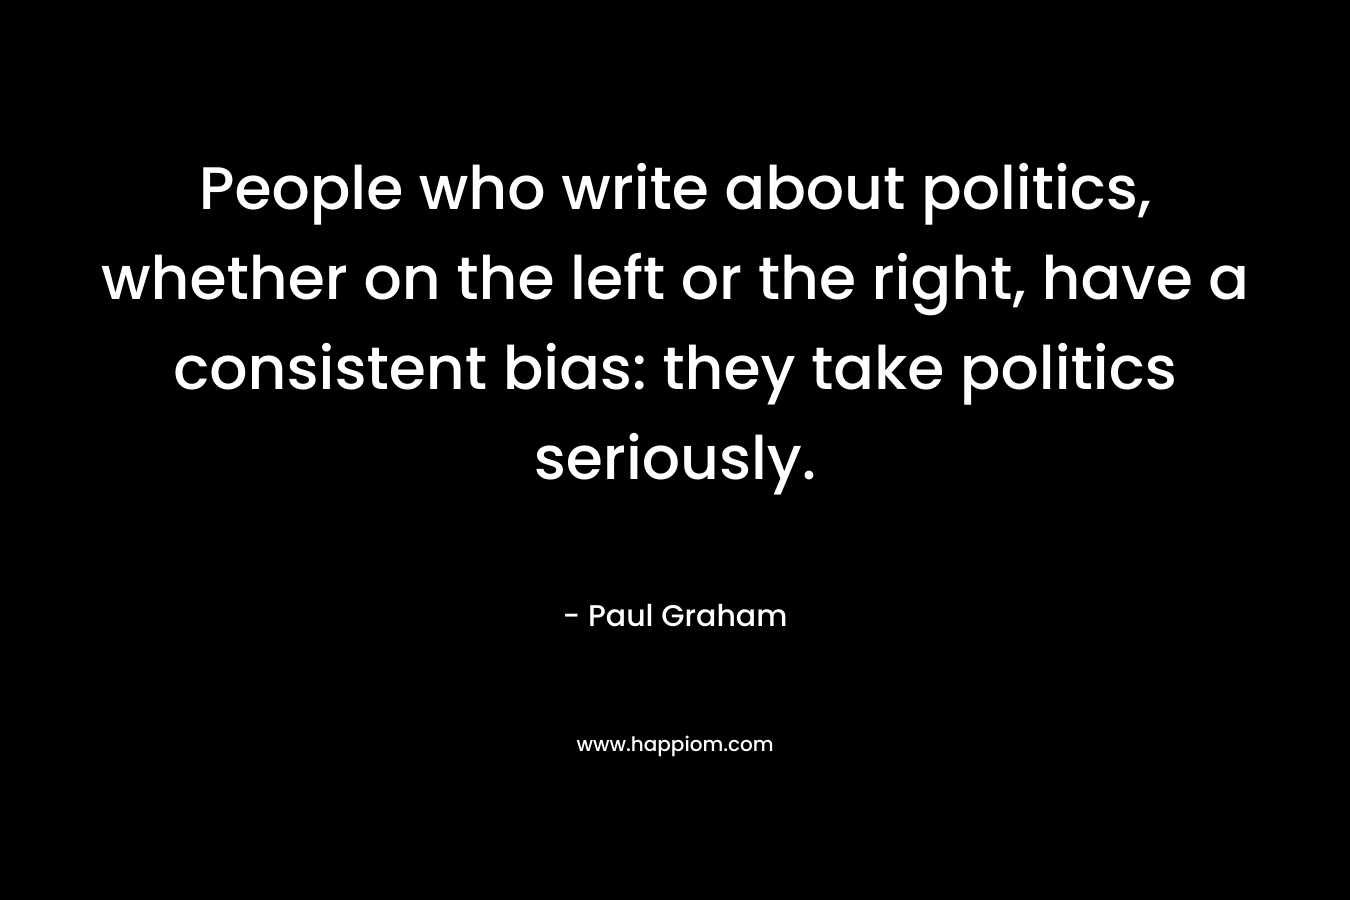 People who write about politics, whether on the left or the right, have a consistent bias: they take politics seriously. – Paul Graham